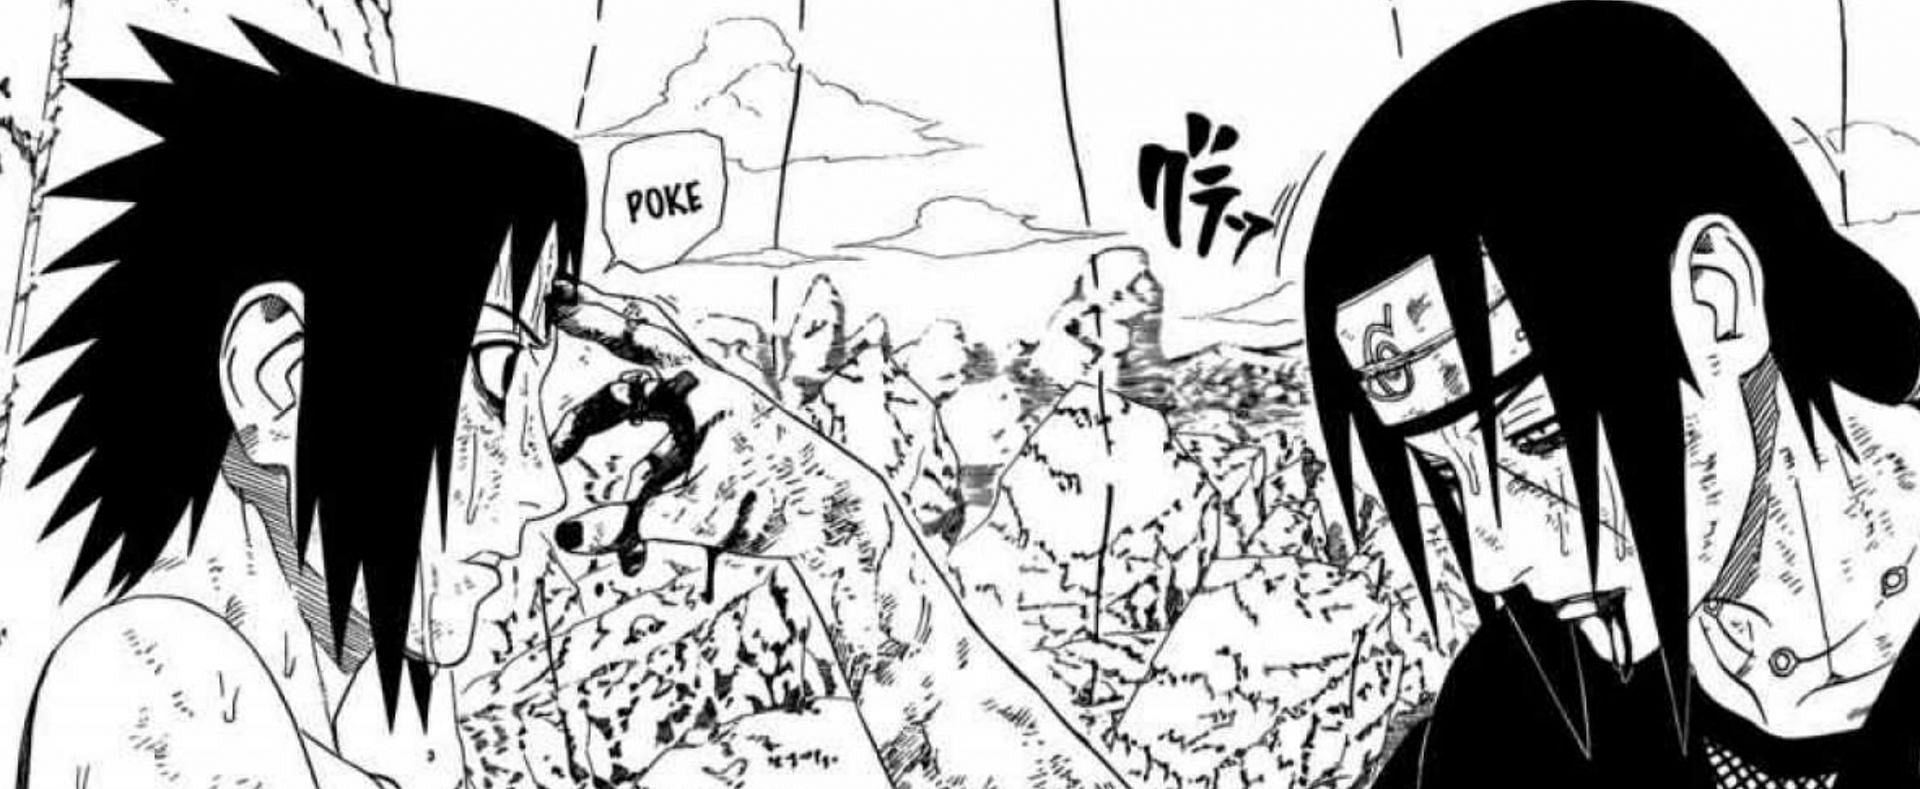 Itachi Uchiha died at the hands of his brother Sasuke in a fated battle (Image via Shonen Jump)